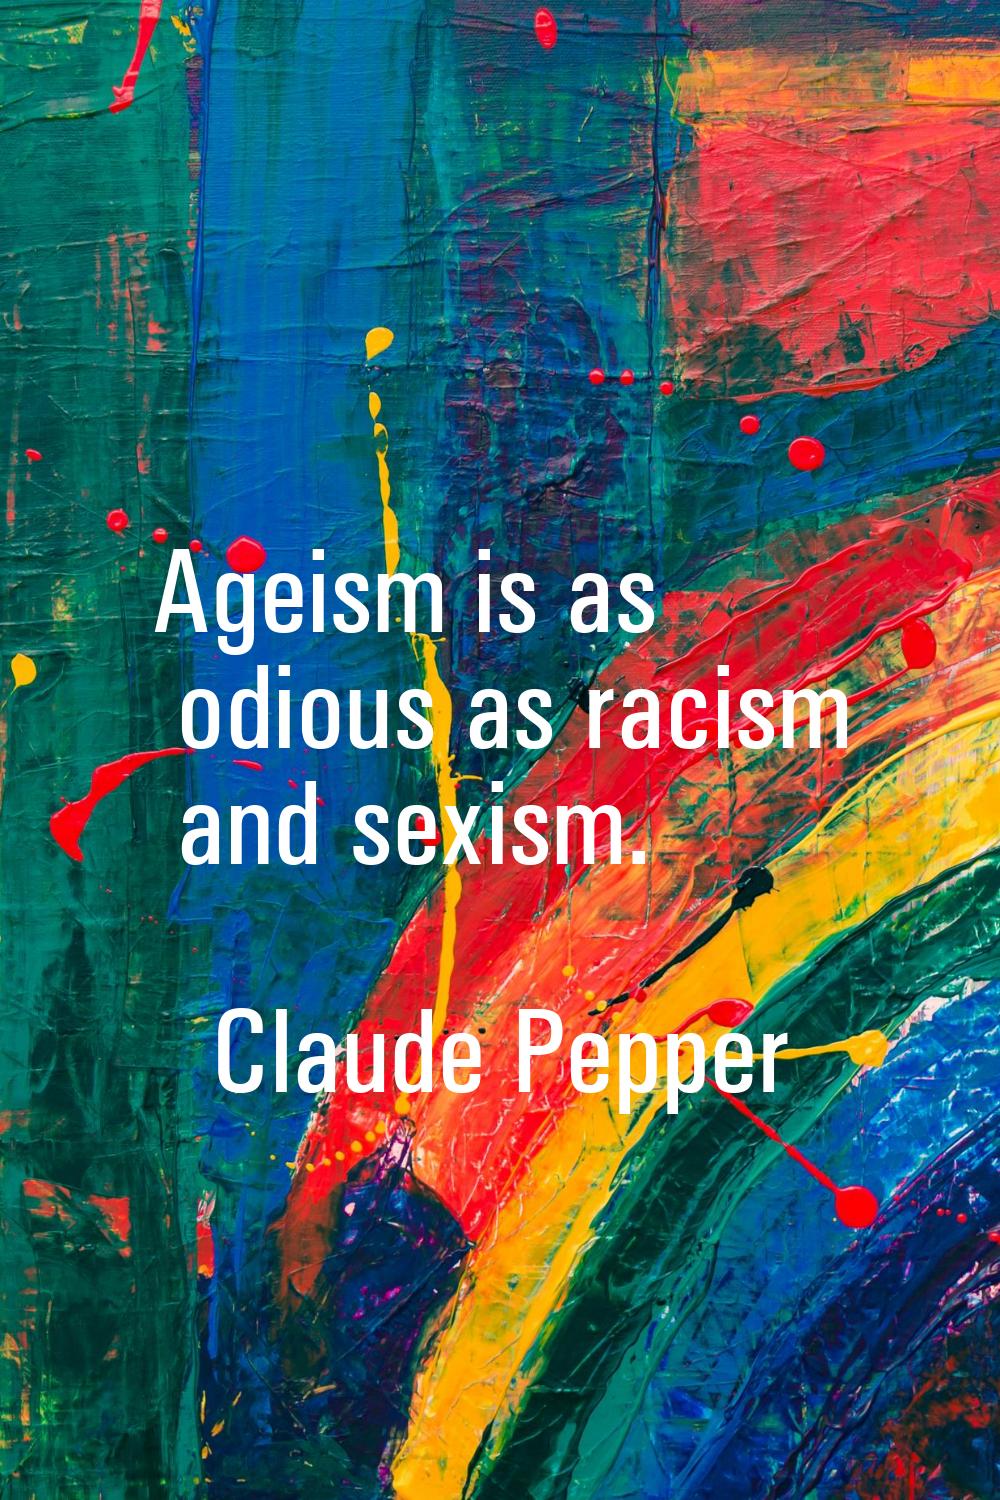 Ageism is as odious as racism and sexism.